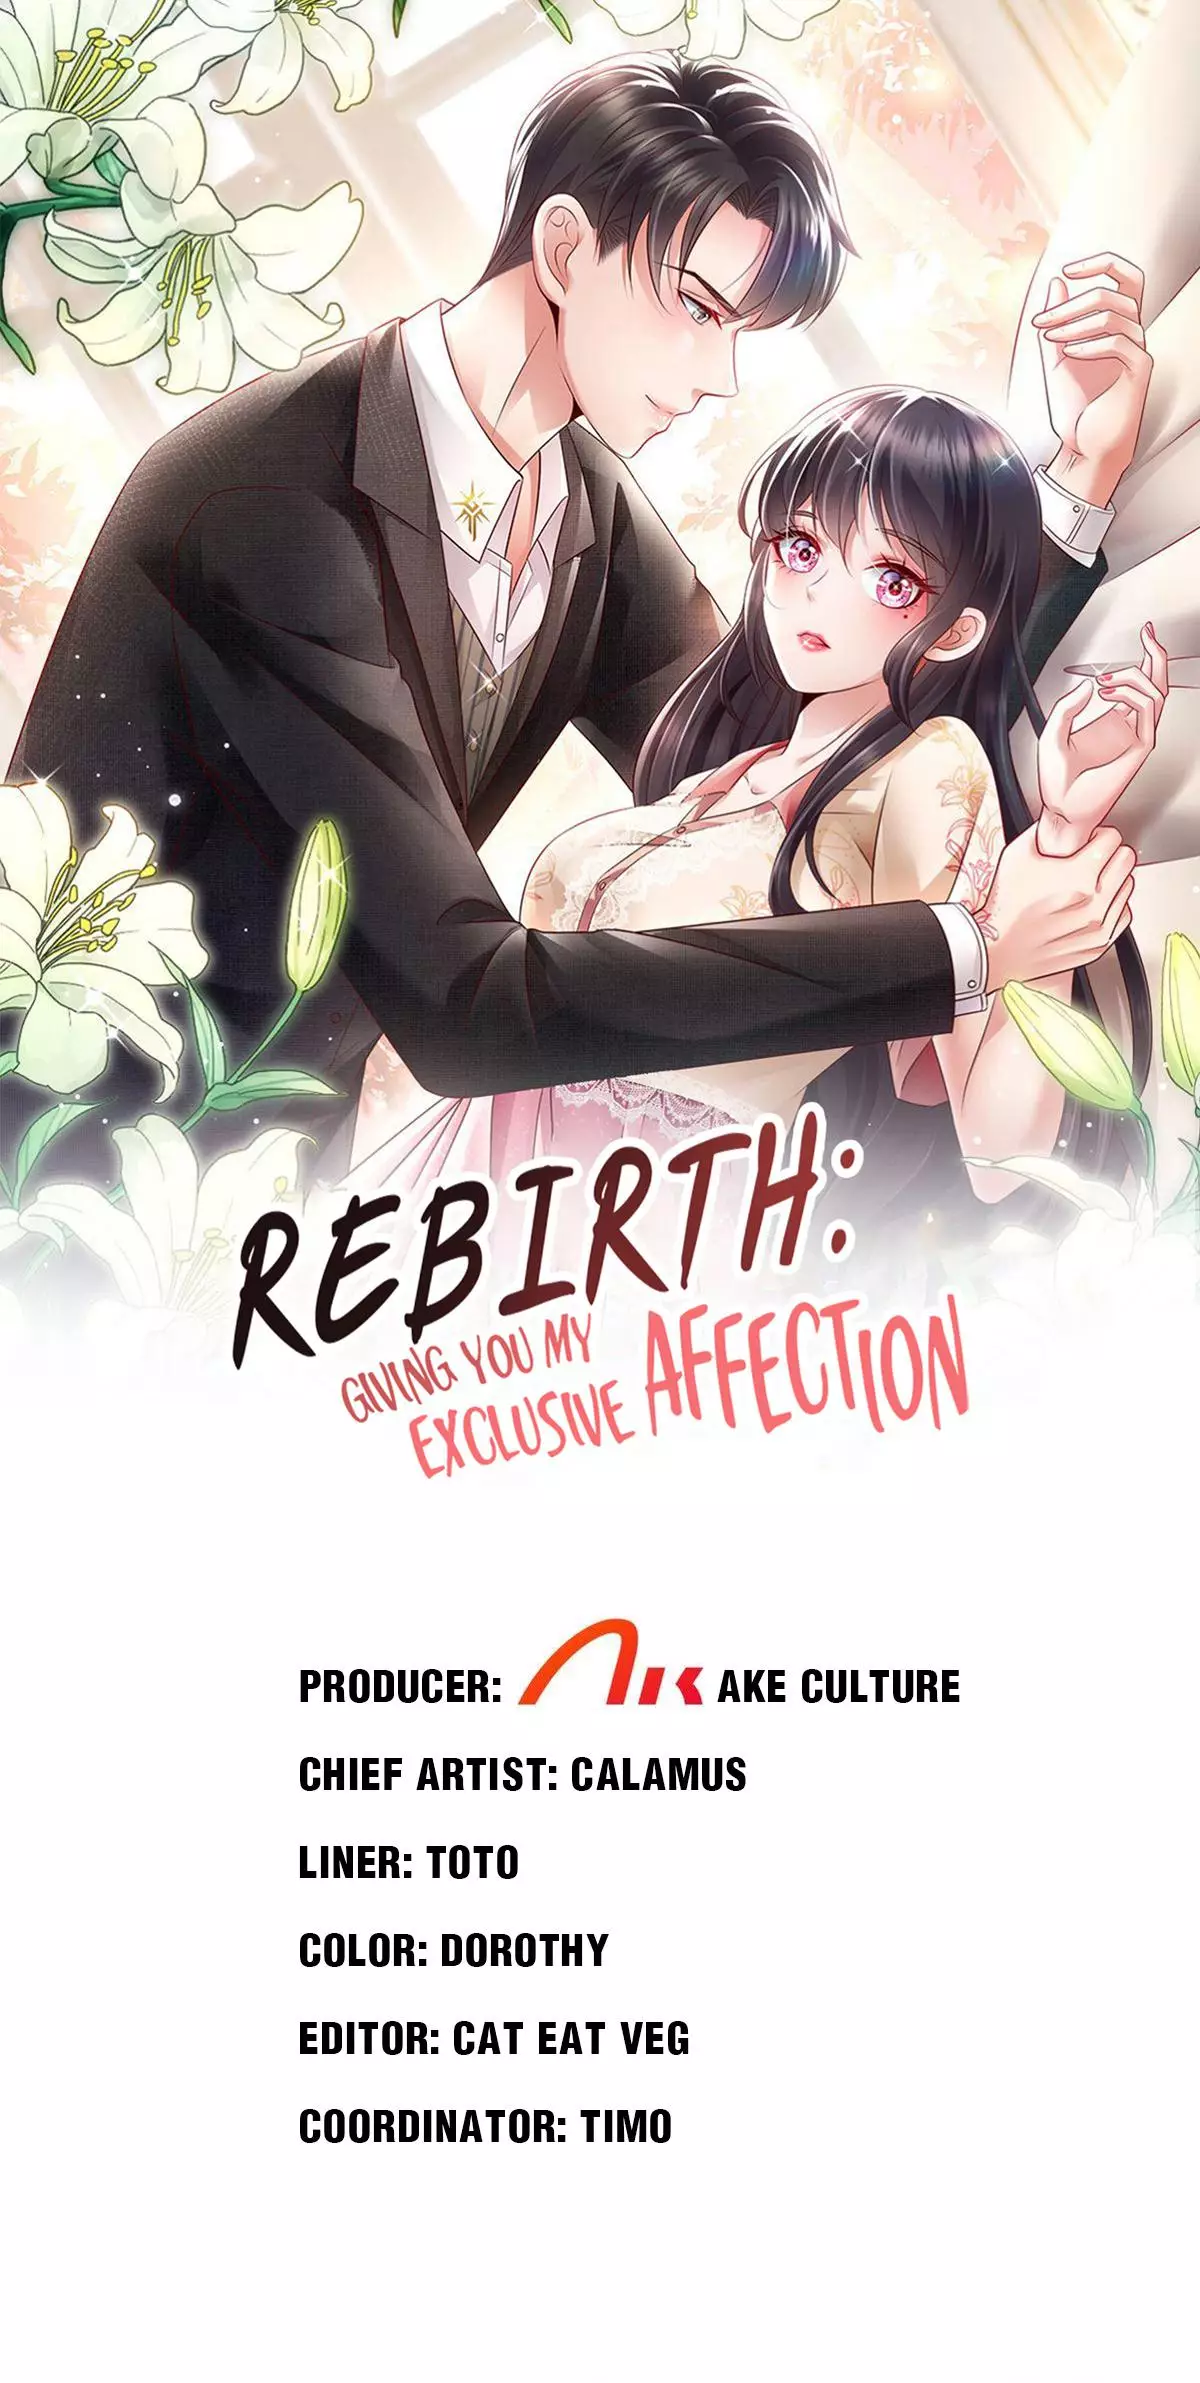 Rebirth: Giving You My Exclusive Affection - 154 page 1-c4c27b1f